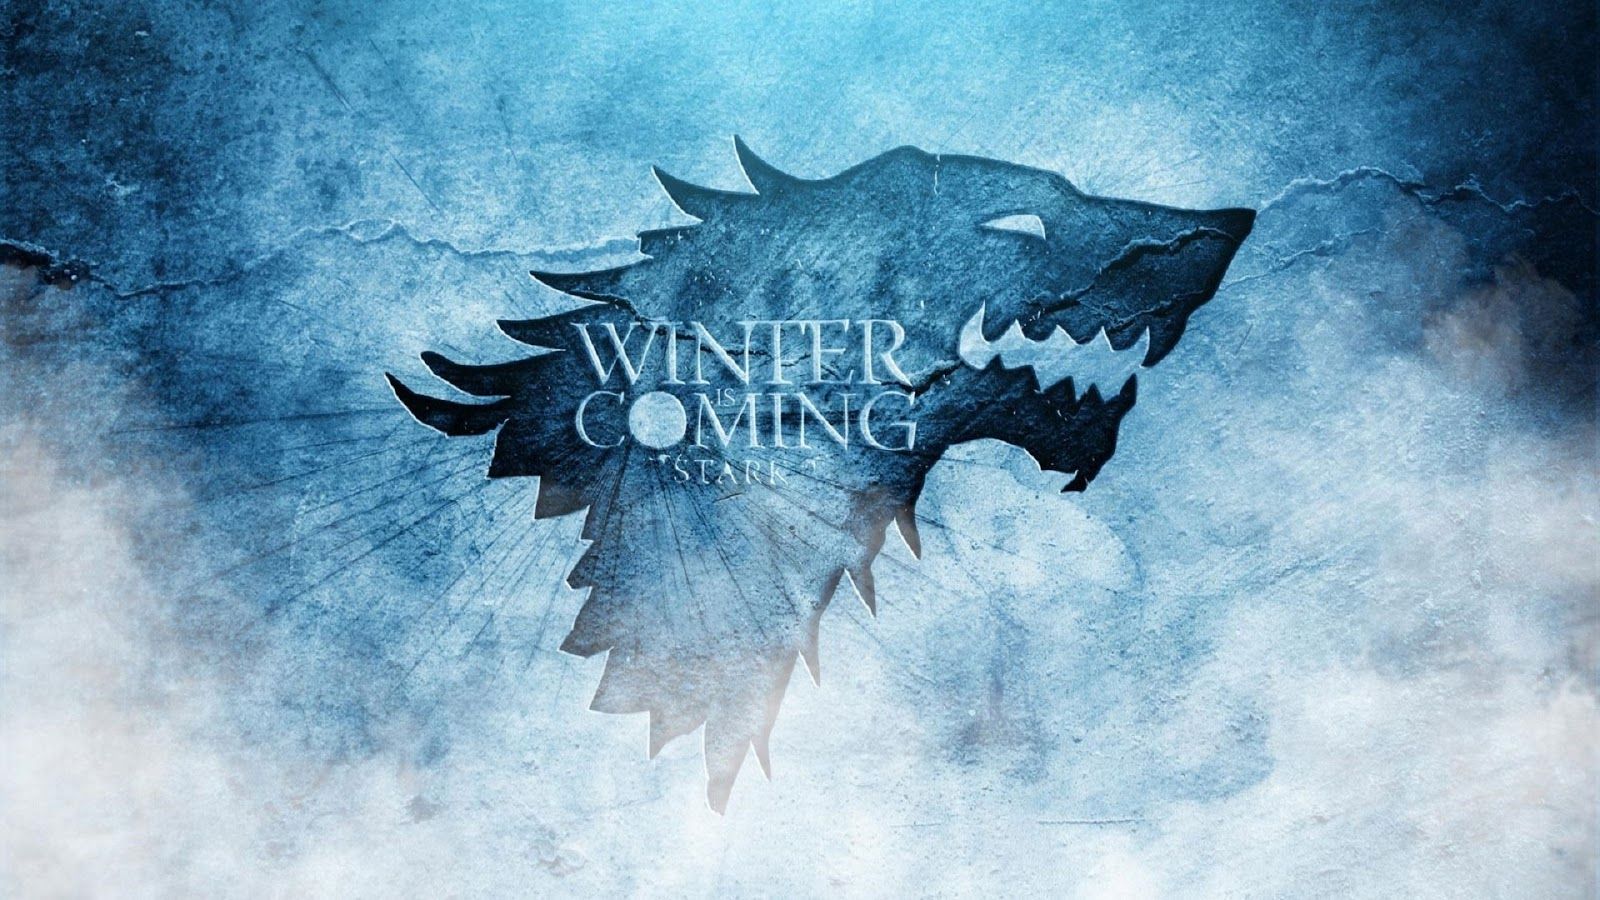 Awesome Game of Thrones Wallpaper # 6772204